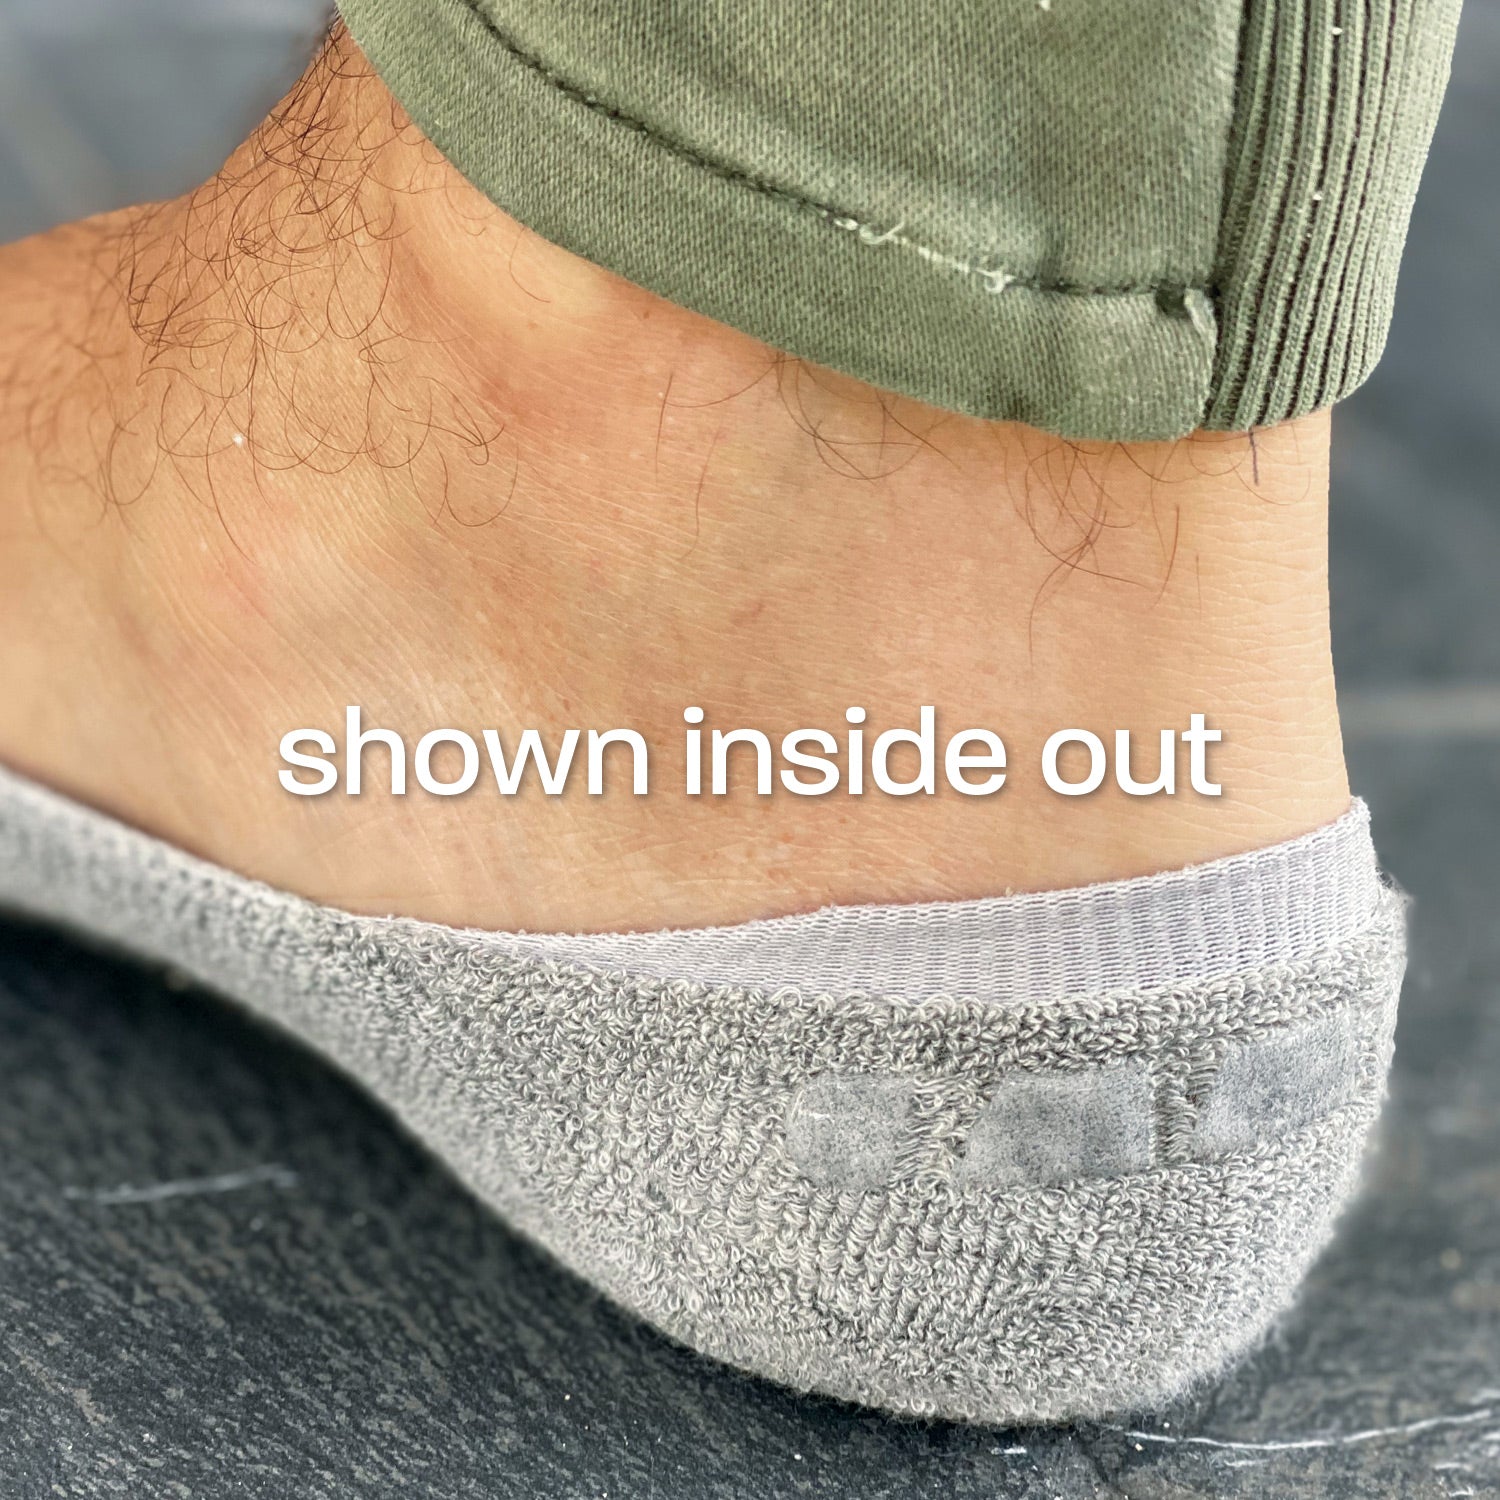 Photo showing close-up of Skinnys Invisibles sock heel-cup inside out on a man's foot, revealing padding and wrap-around gel grip